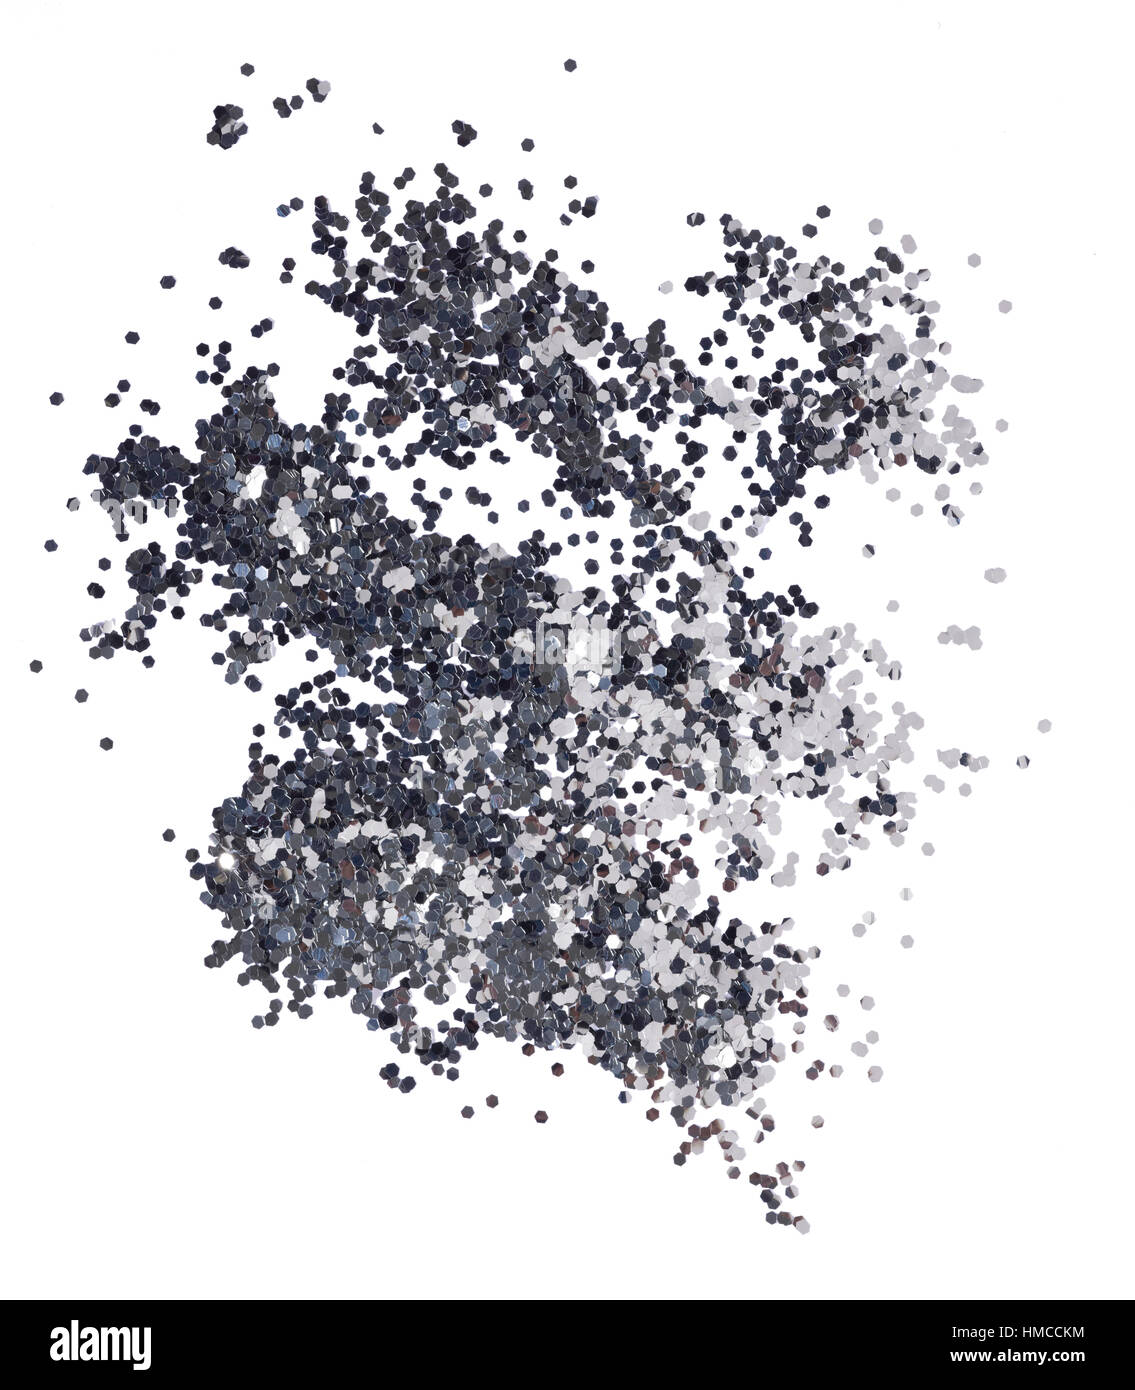 a cut out beauty image of a sample of scattered silver make up glitter Stock Photo